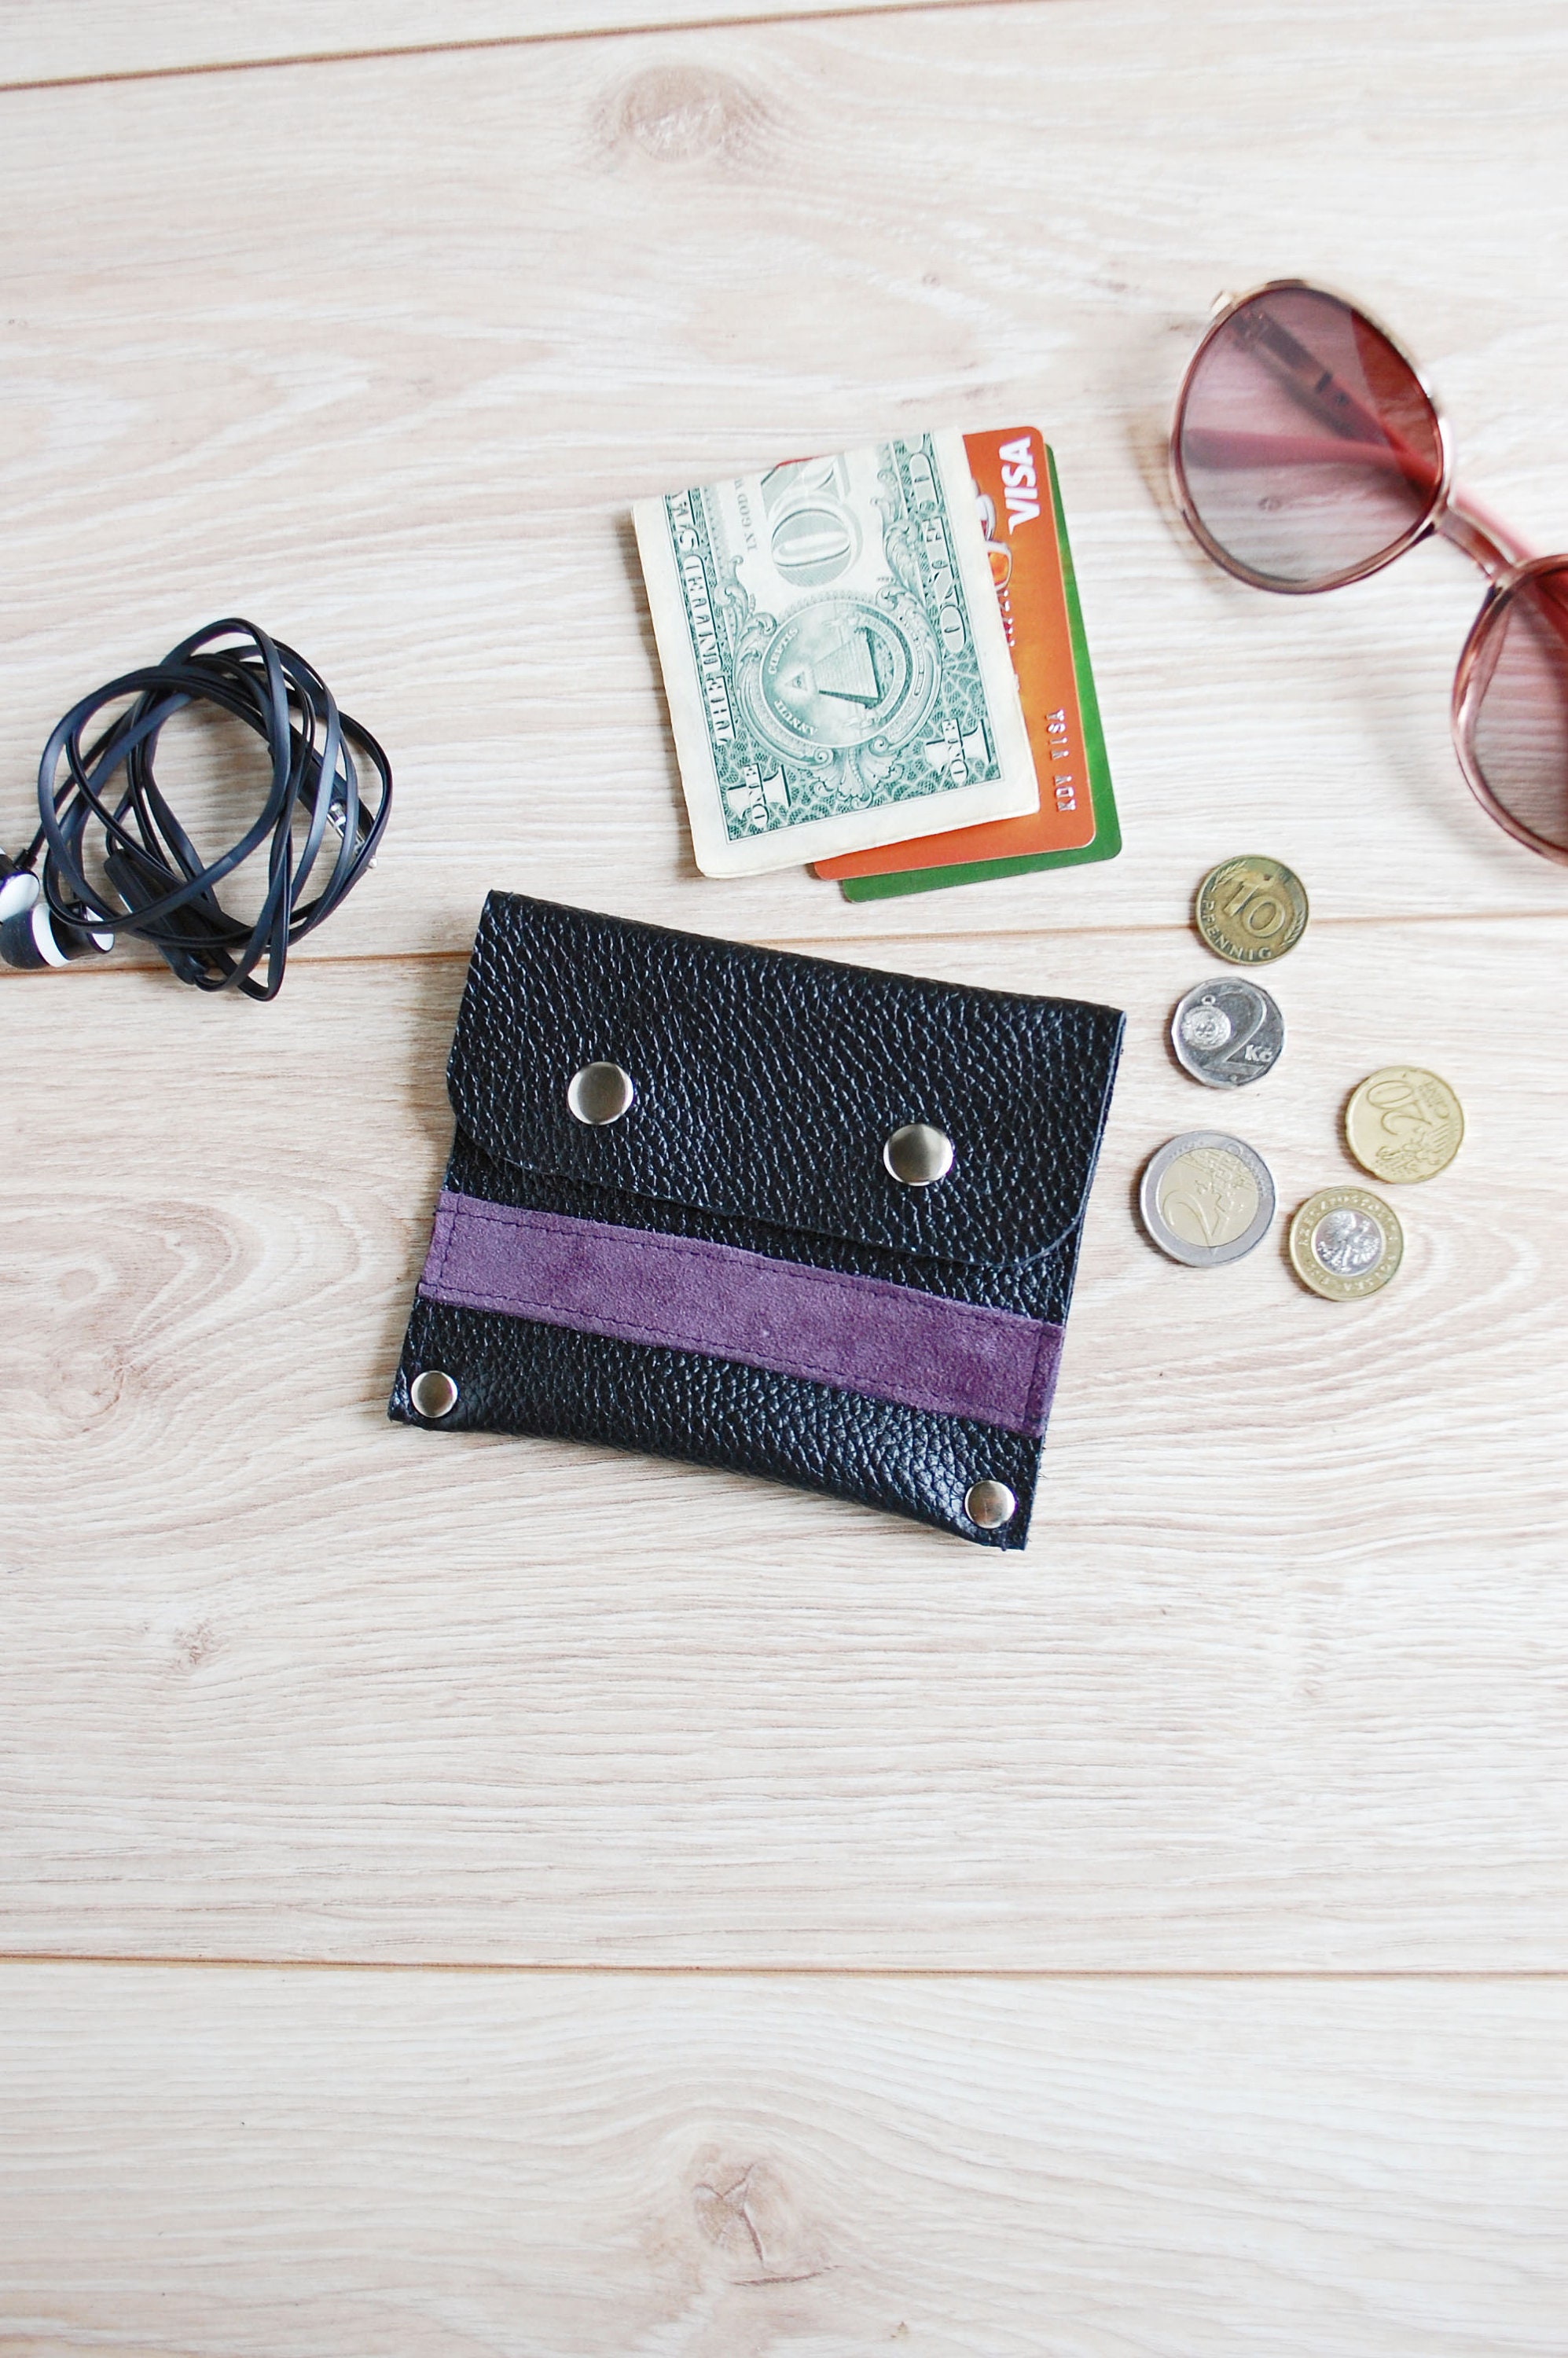 tiny coin pouch gifts - Noodlehead